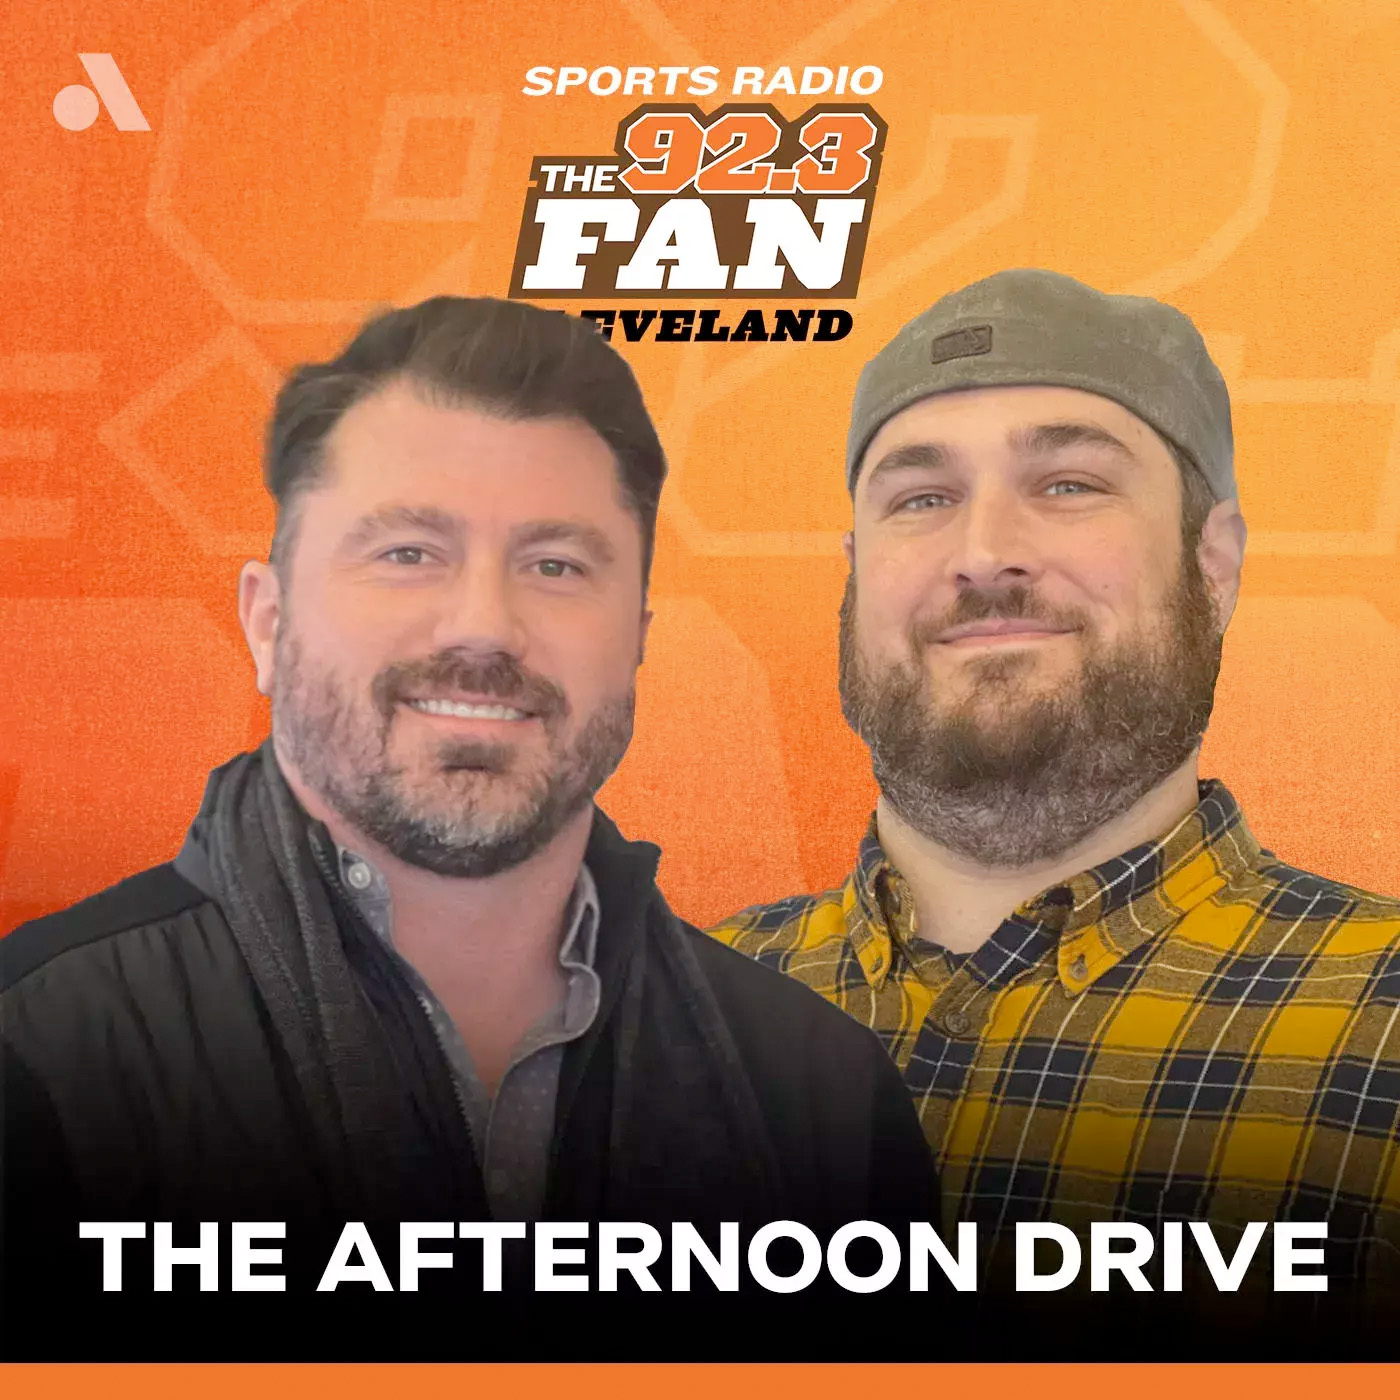 Adam 'the Bull' talks Browns-Steelers with the playoffs on the line for Cleveland